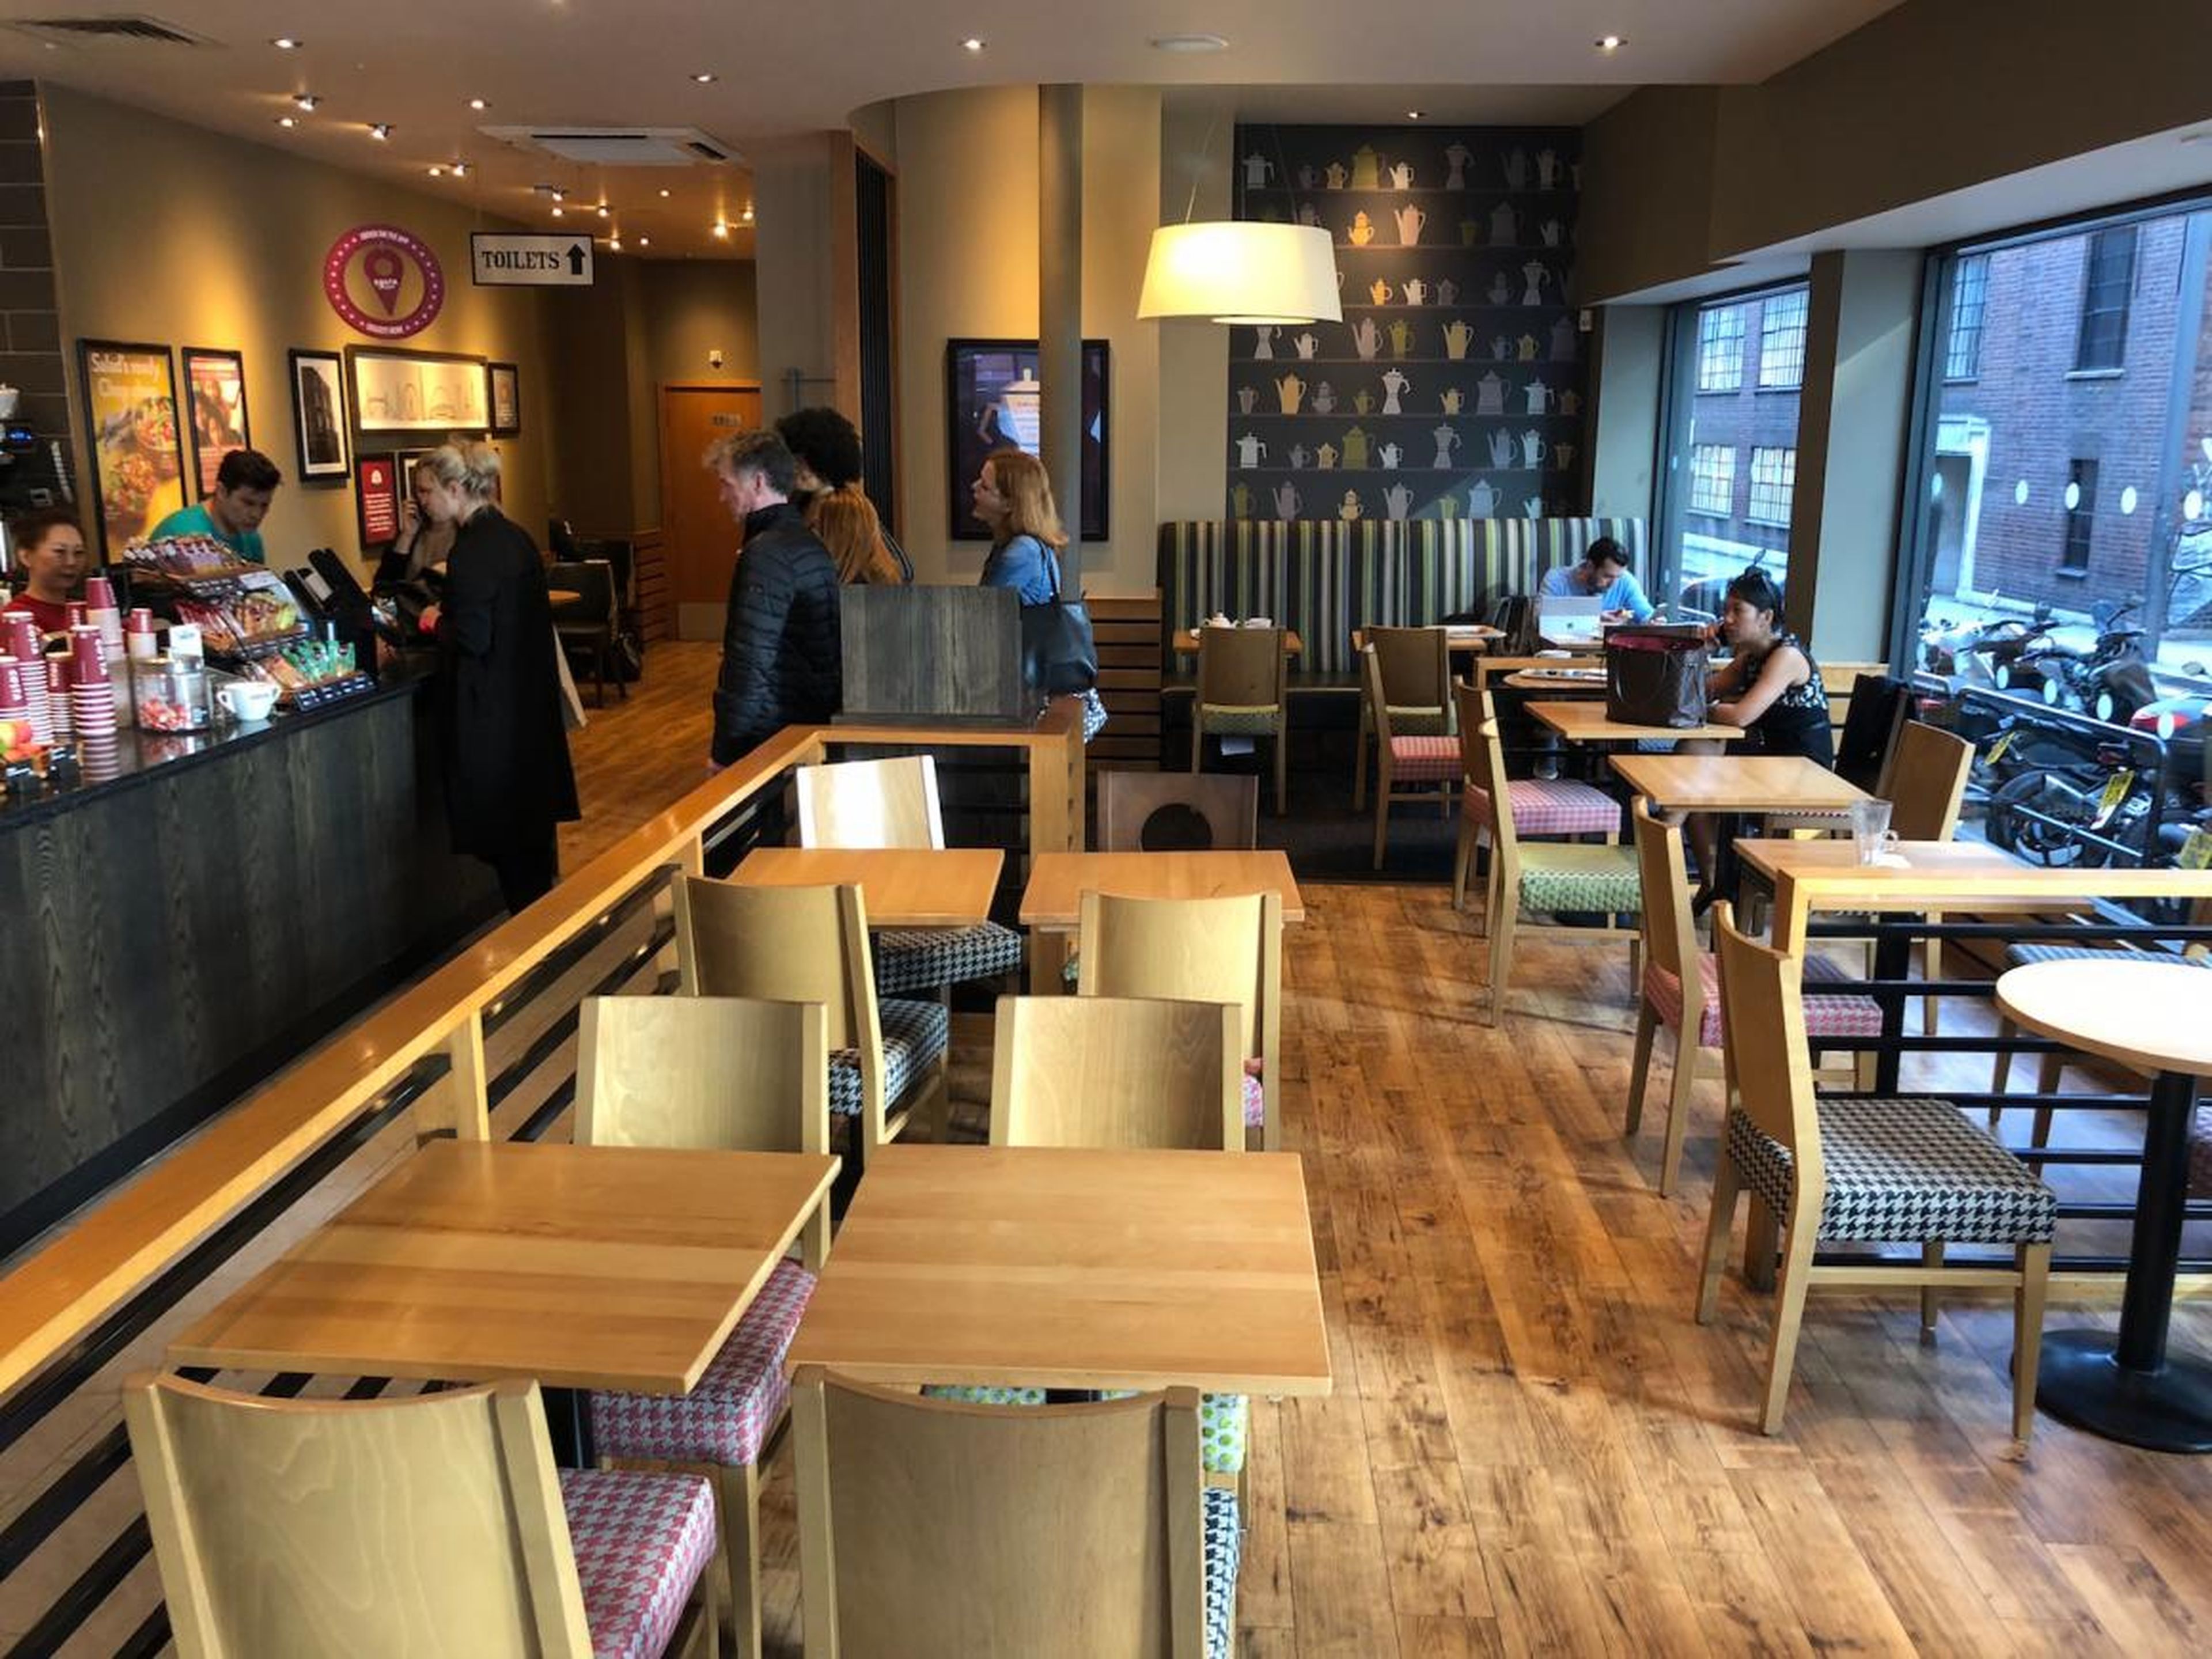 Inside, Costa Coffee is a very bog-standard coffee shop. The decor, much like the food, is bland and inoffensive without being particularly nice. The store has no particular theme or style — it's just ... "coffee shop."